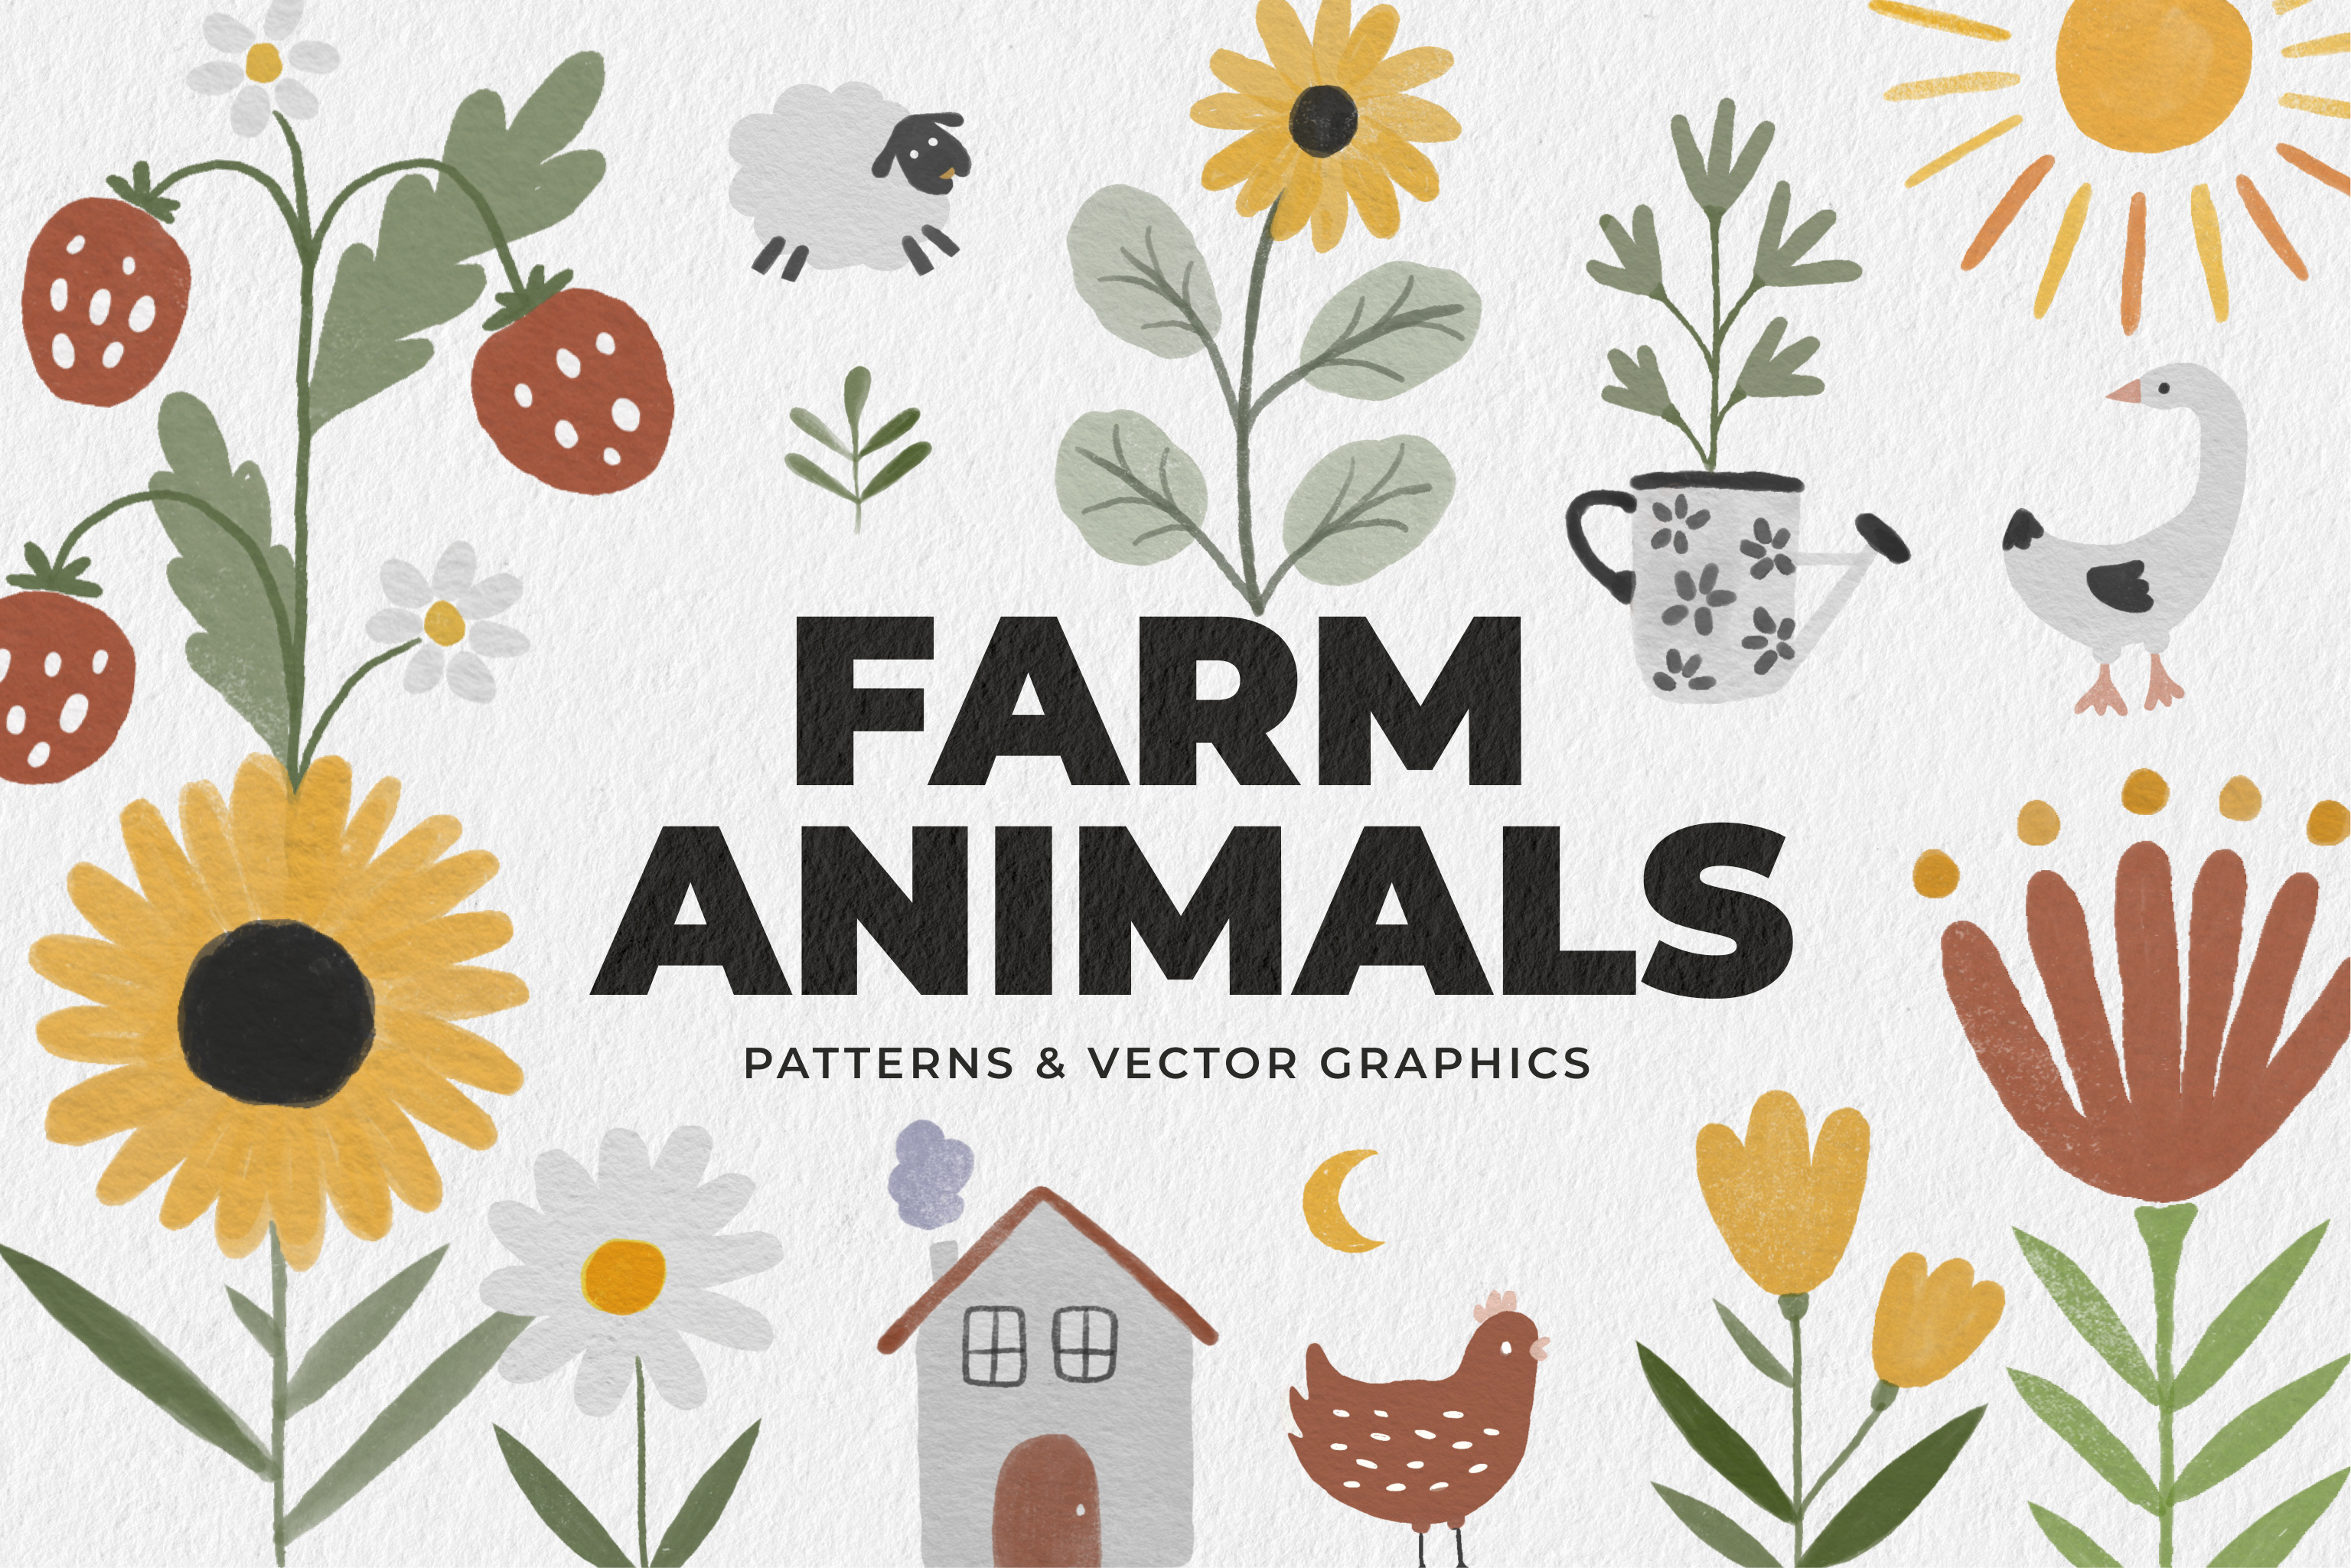 FARM ANIMALS patterns and graphics rendition image